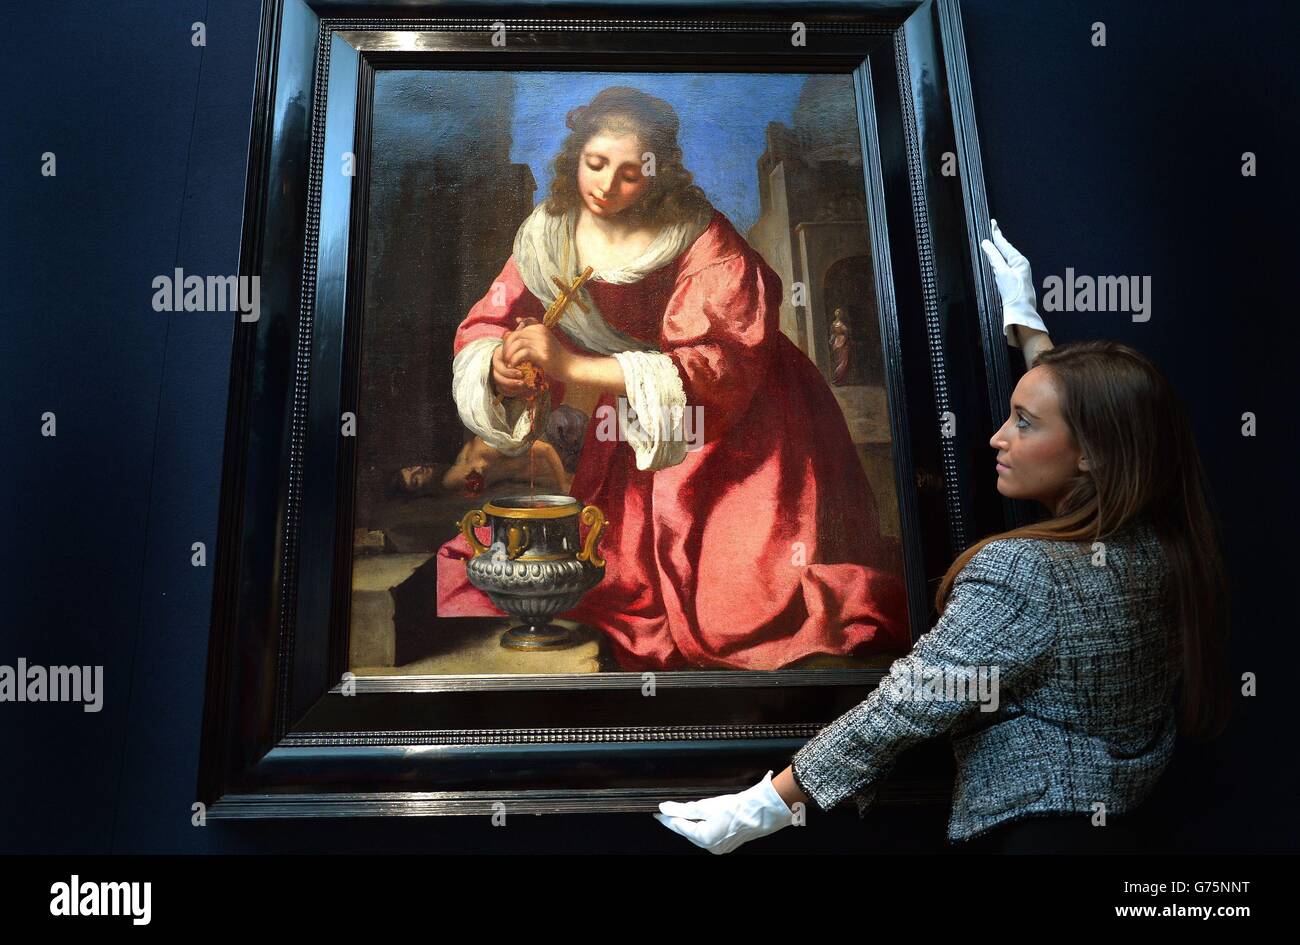 A Christie's member of staff looks at a portrait Saint Praxedis by Johannes Vermeer which will be auctioned as part of the Old Master &amp; British Paintings sale at Christie's in London. Stock Photo